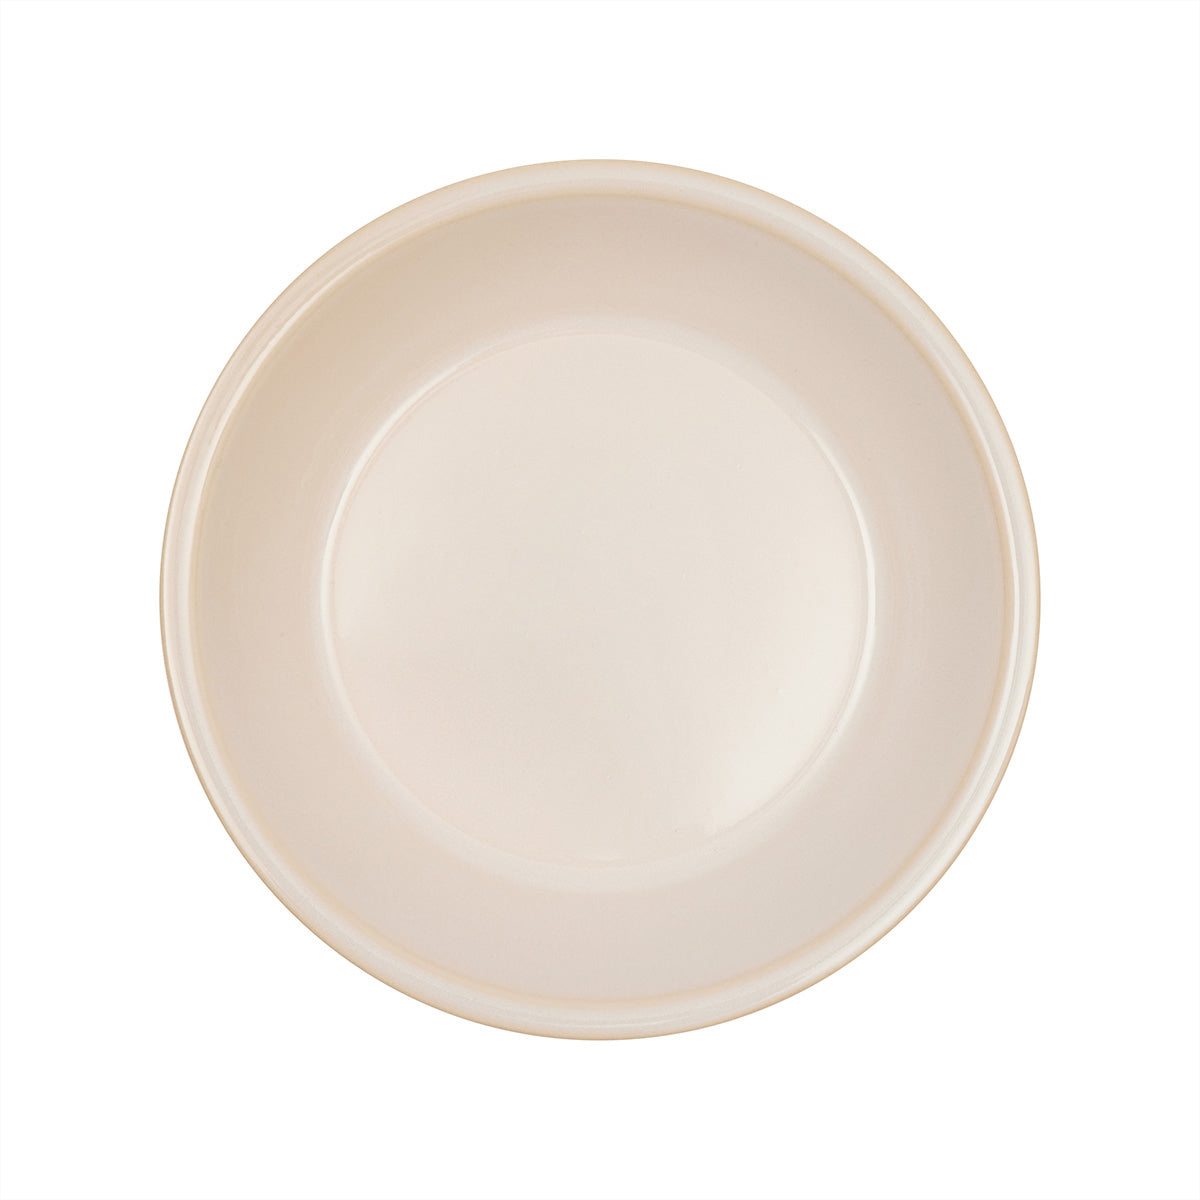 OYOY LIVING Yuka Deep Plate - Pack of 2 Dining Ware 102 Offwhite